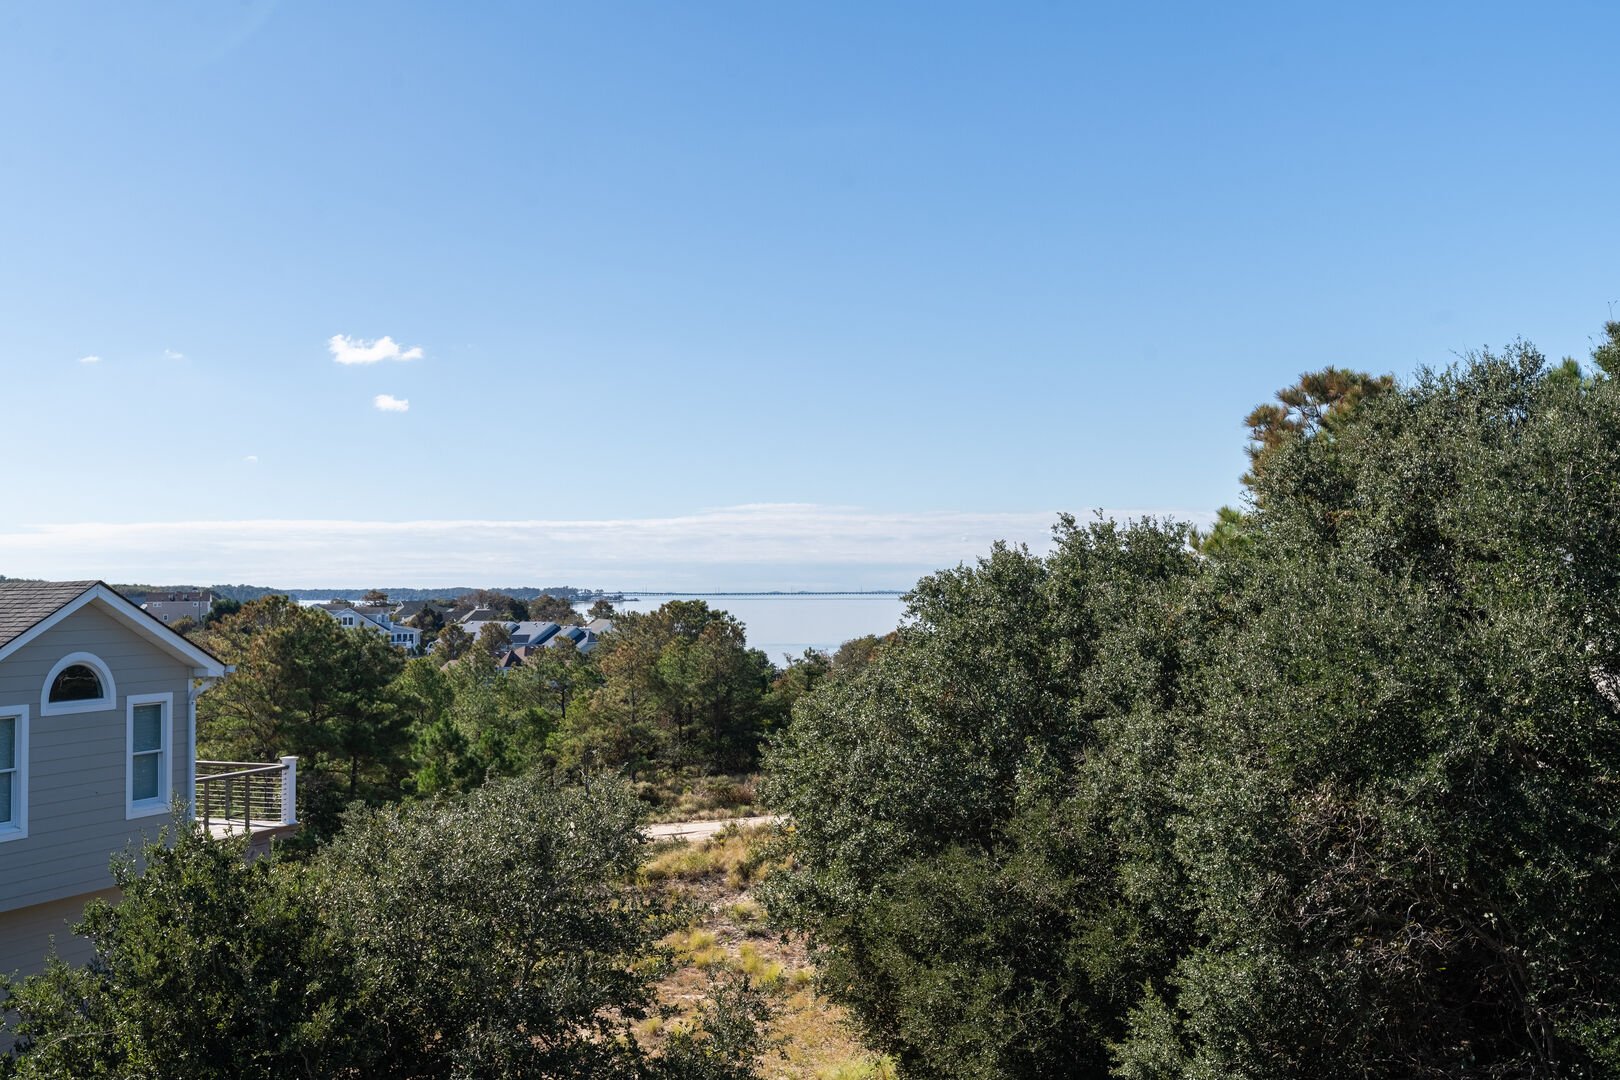 View to the Currituck Sound